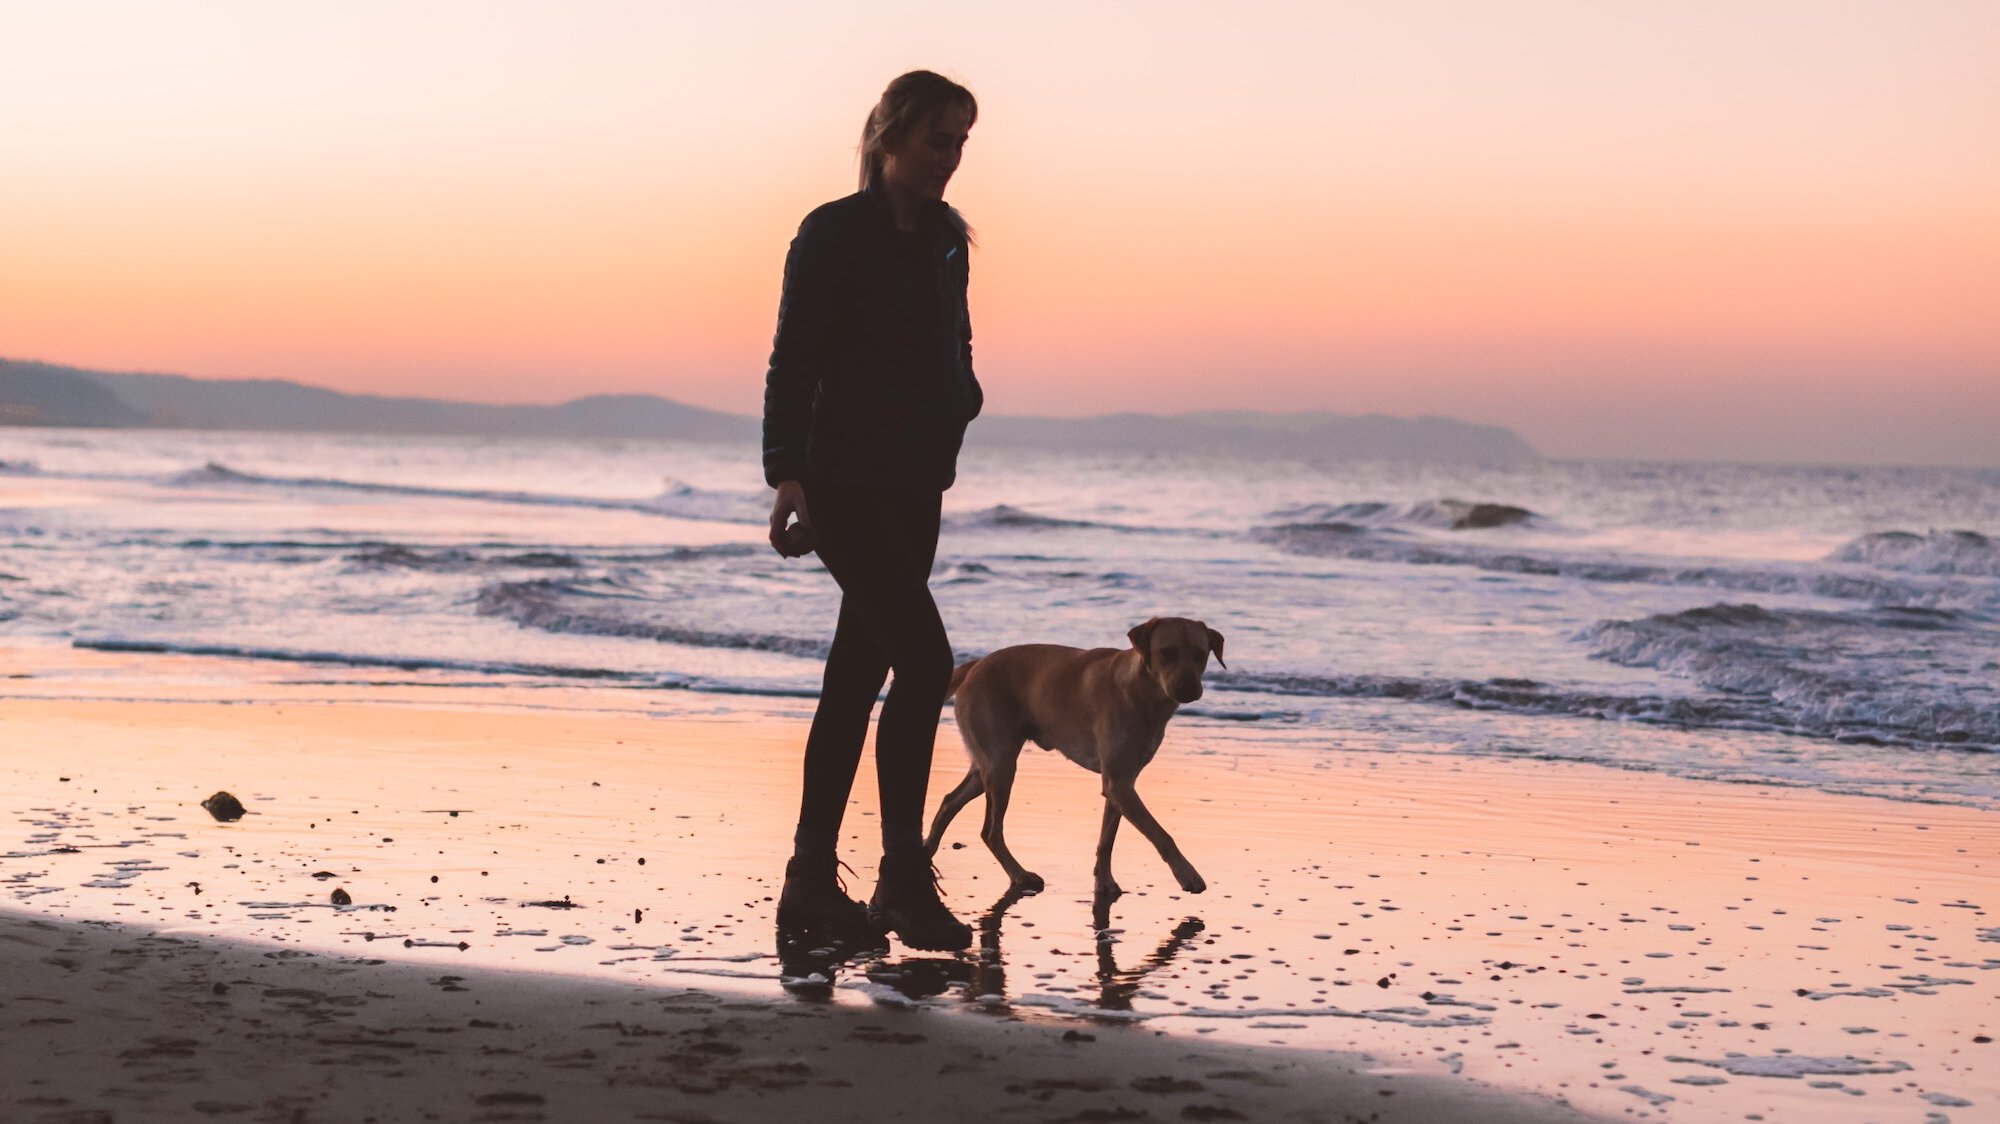 Owner & dog walking on a beach at sunset